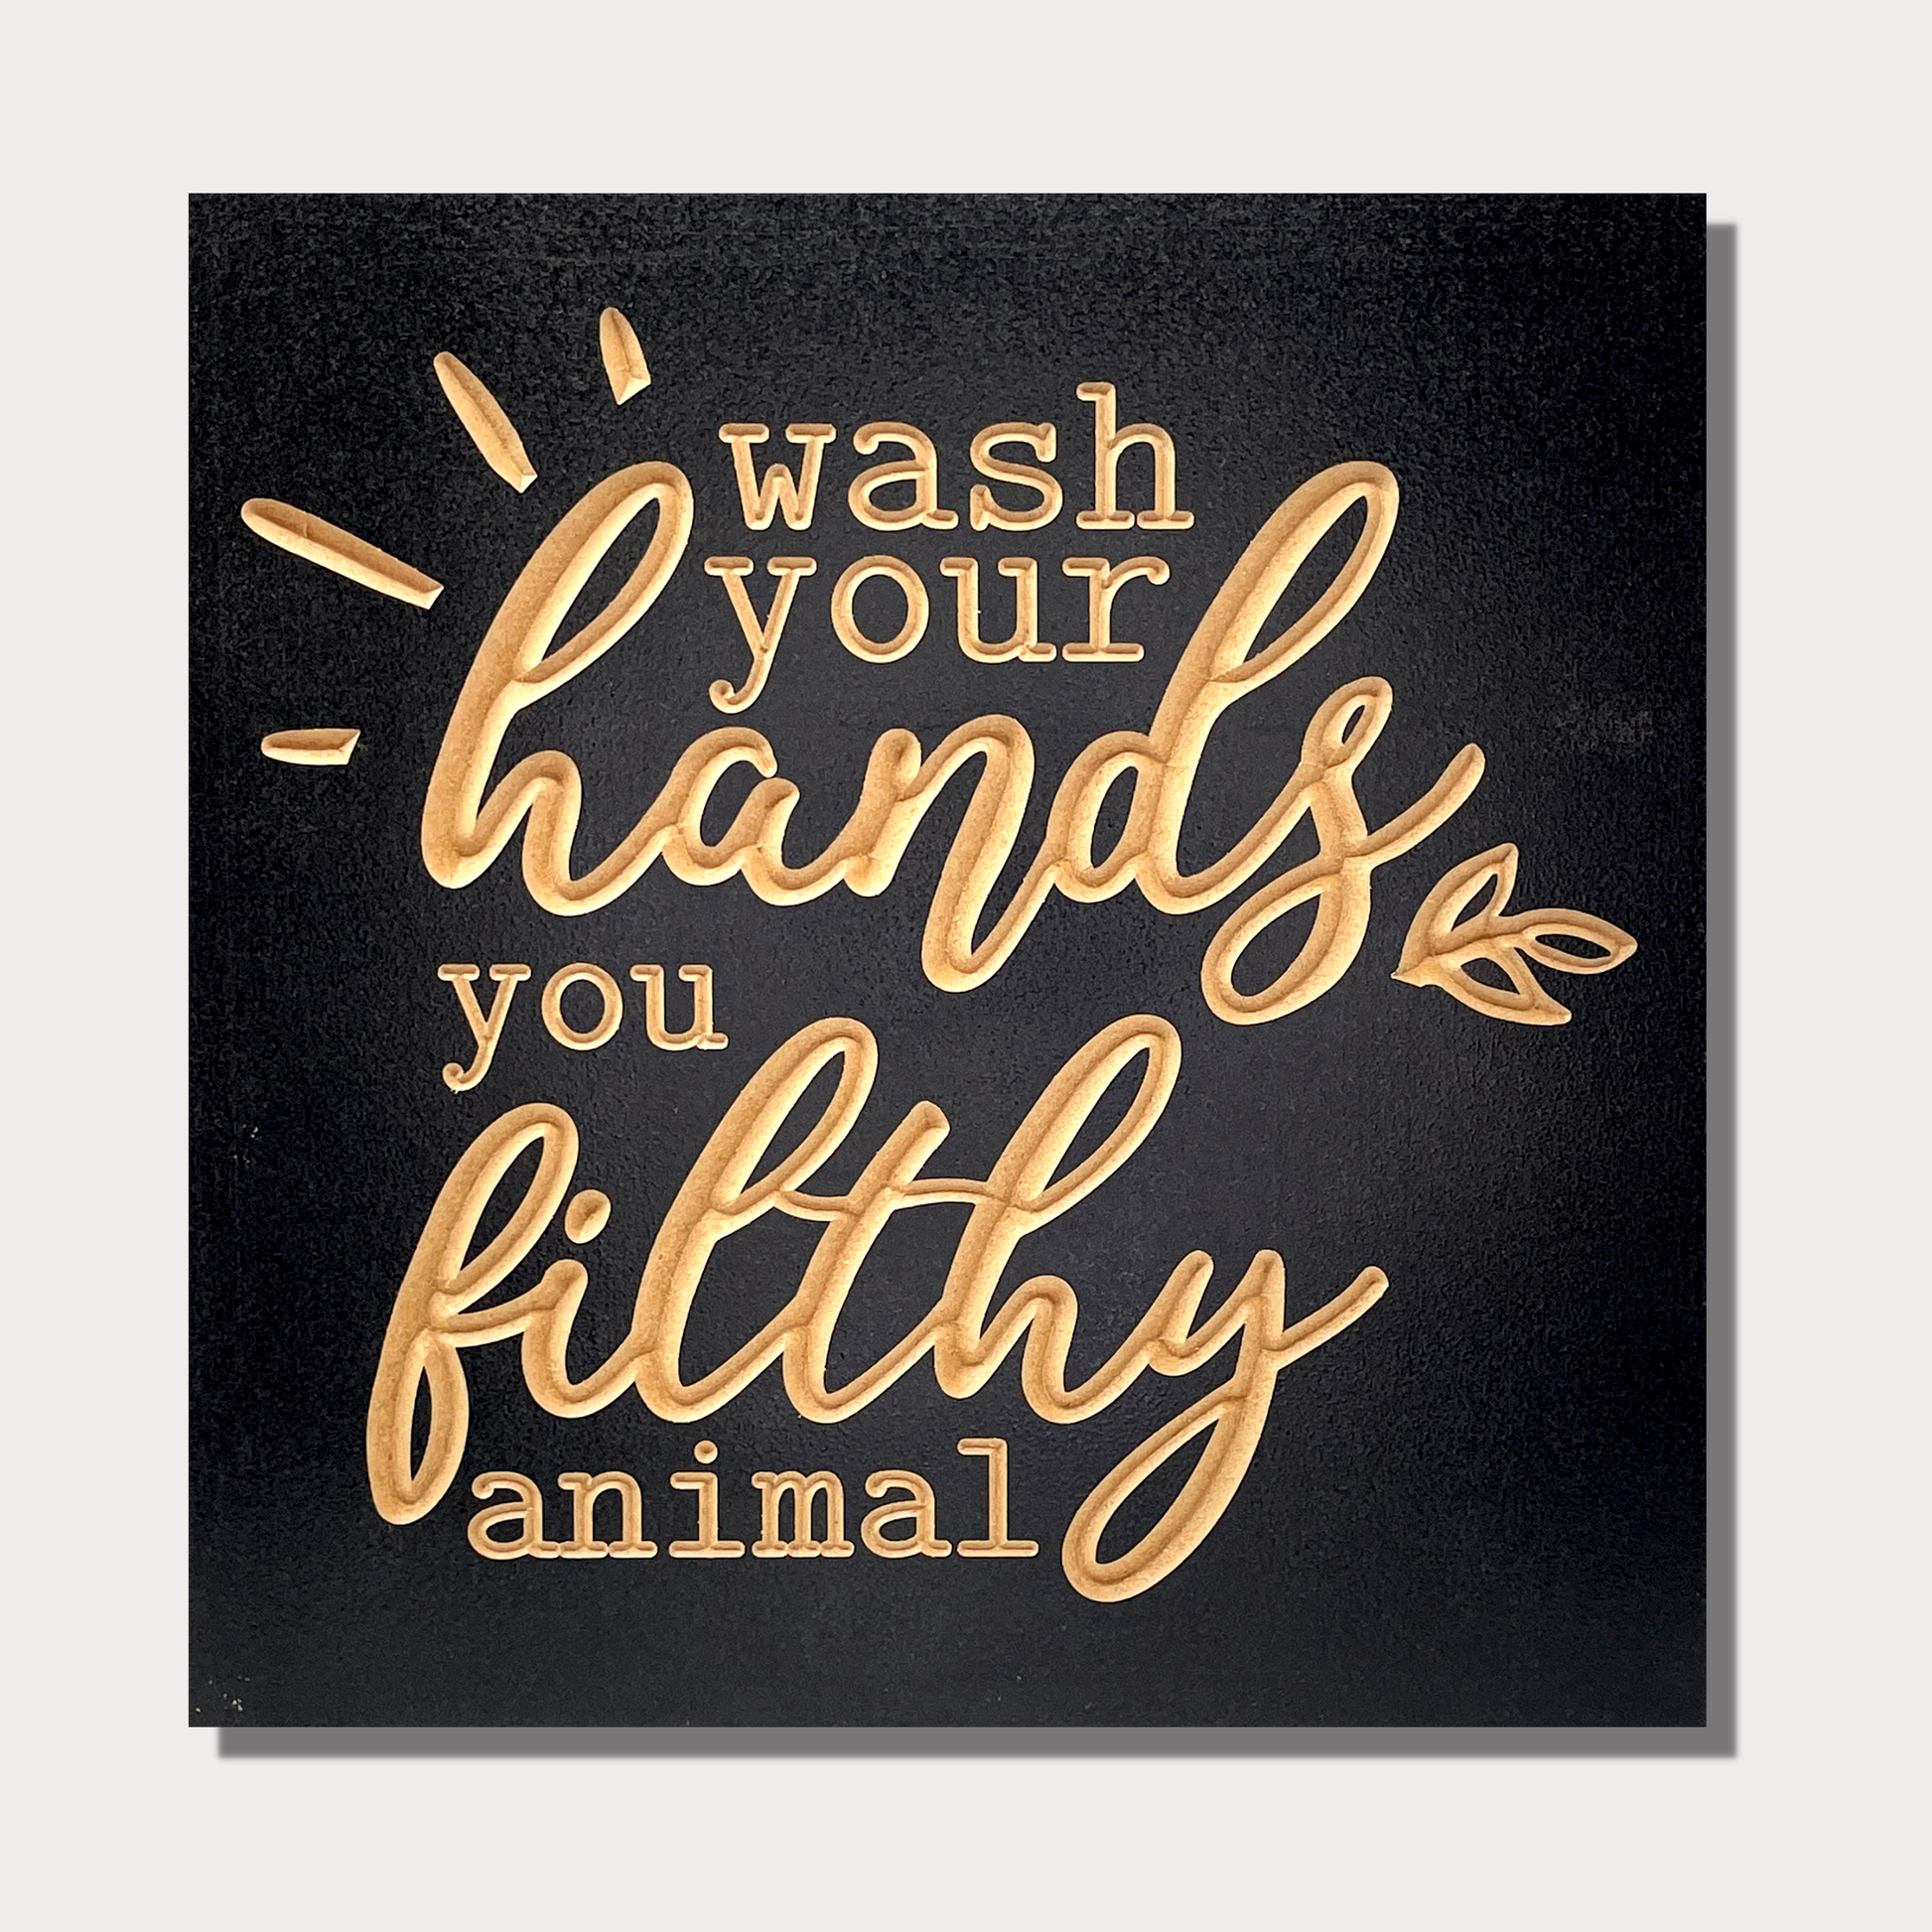 Wash Your Hands You Filty Animal Funny Bathroom Sign